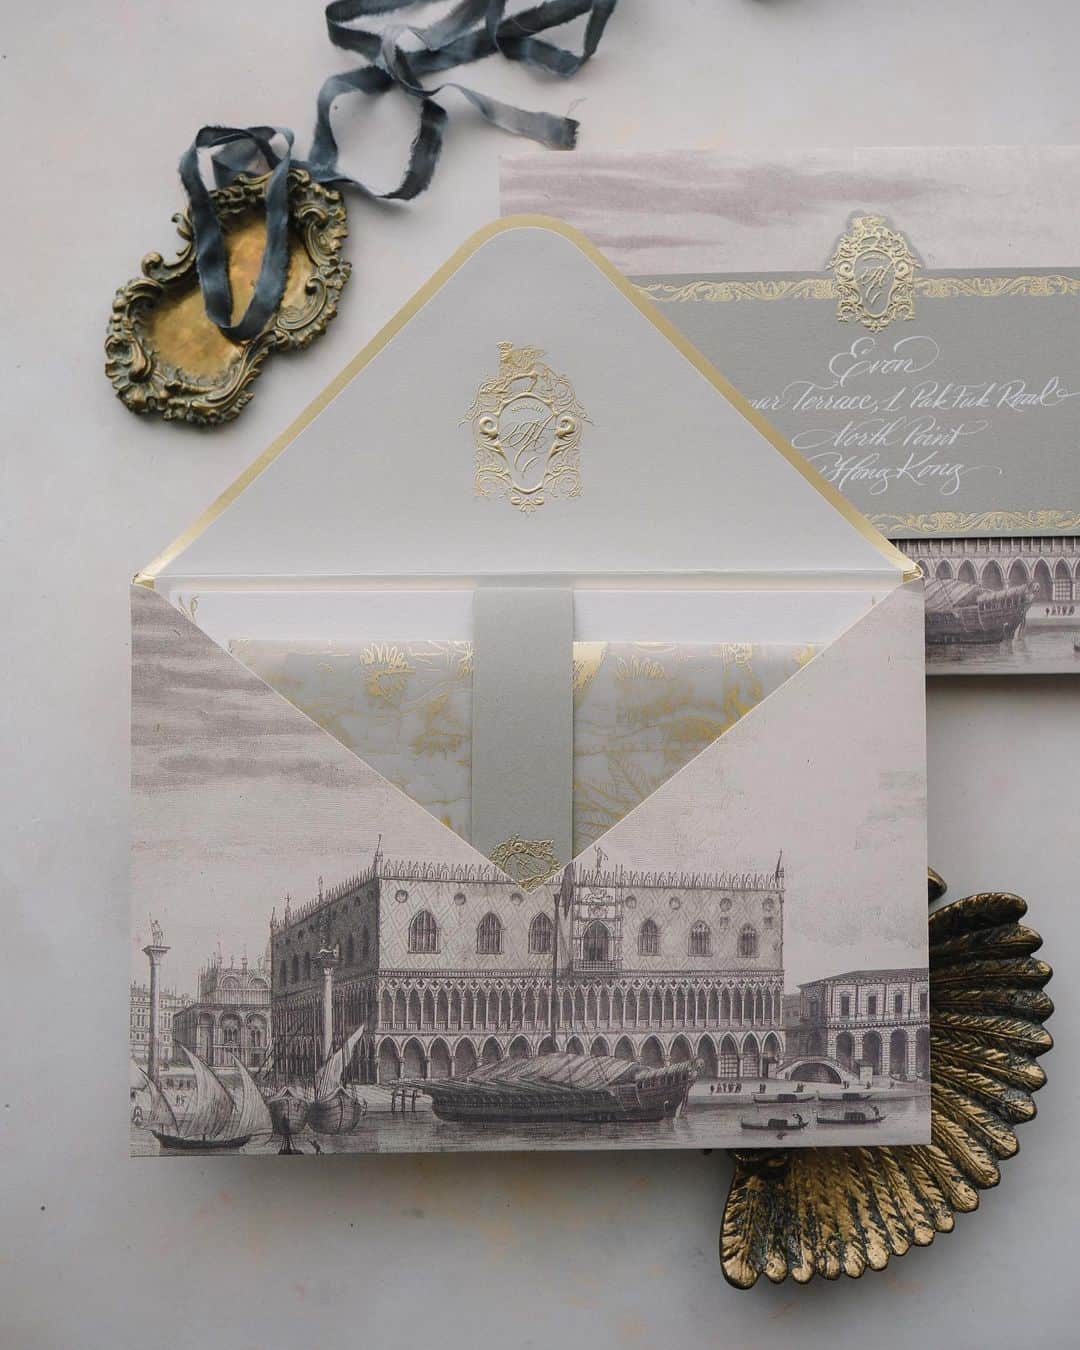 Veronica Halimのインスタグラム：「Experience a world of elegance and opulence with this invitation suite, meticulously crafted for a wedding at the iconic Palazzo Pisani Moretta in Venice. Every card piece showcases intricate designs, capturing the timeless allure and romantic essence of Venice's antique charm. —  #palazzopisanimoretta #destinationwedding #venicewedding #venetianwedding #truffypi  #カリグラフィースタイリング  #weddinginvitation #weddingstationery  #embossed  #paperlovers #ウェディング #ウェディングアイテム #カリグラファ #veronicahalim #スタイリング #prettypapers #weddingsuite #venice #amanvenice」